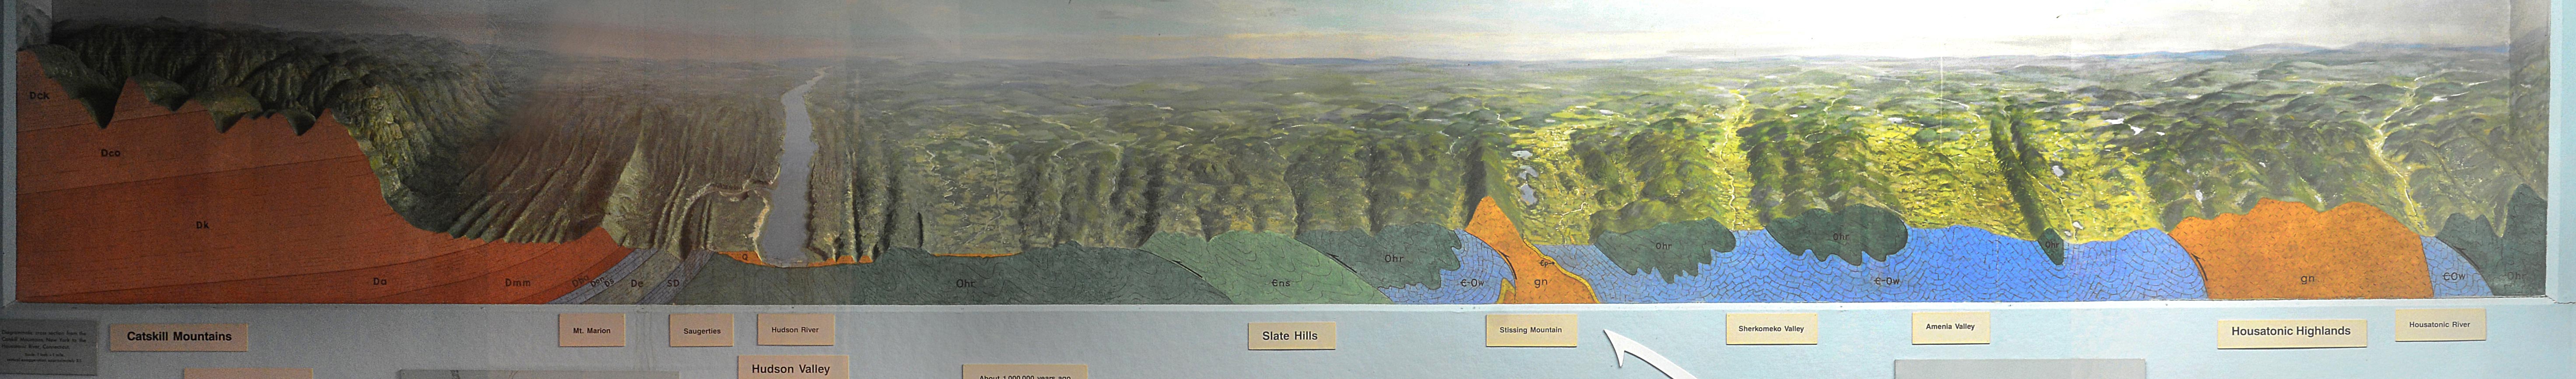 Section of museum case showing a model illustrating the geological history and structure of Stissing Mountain.